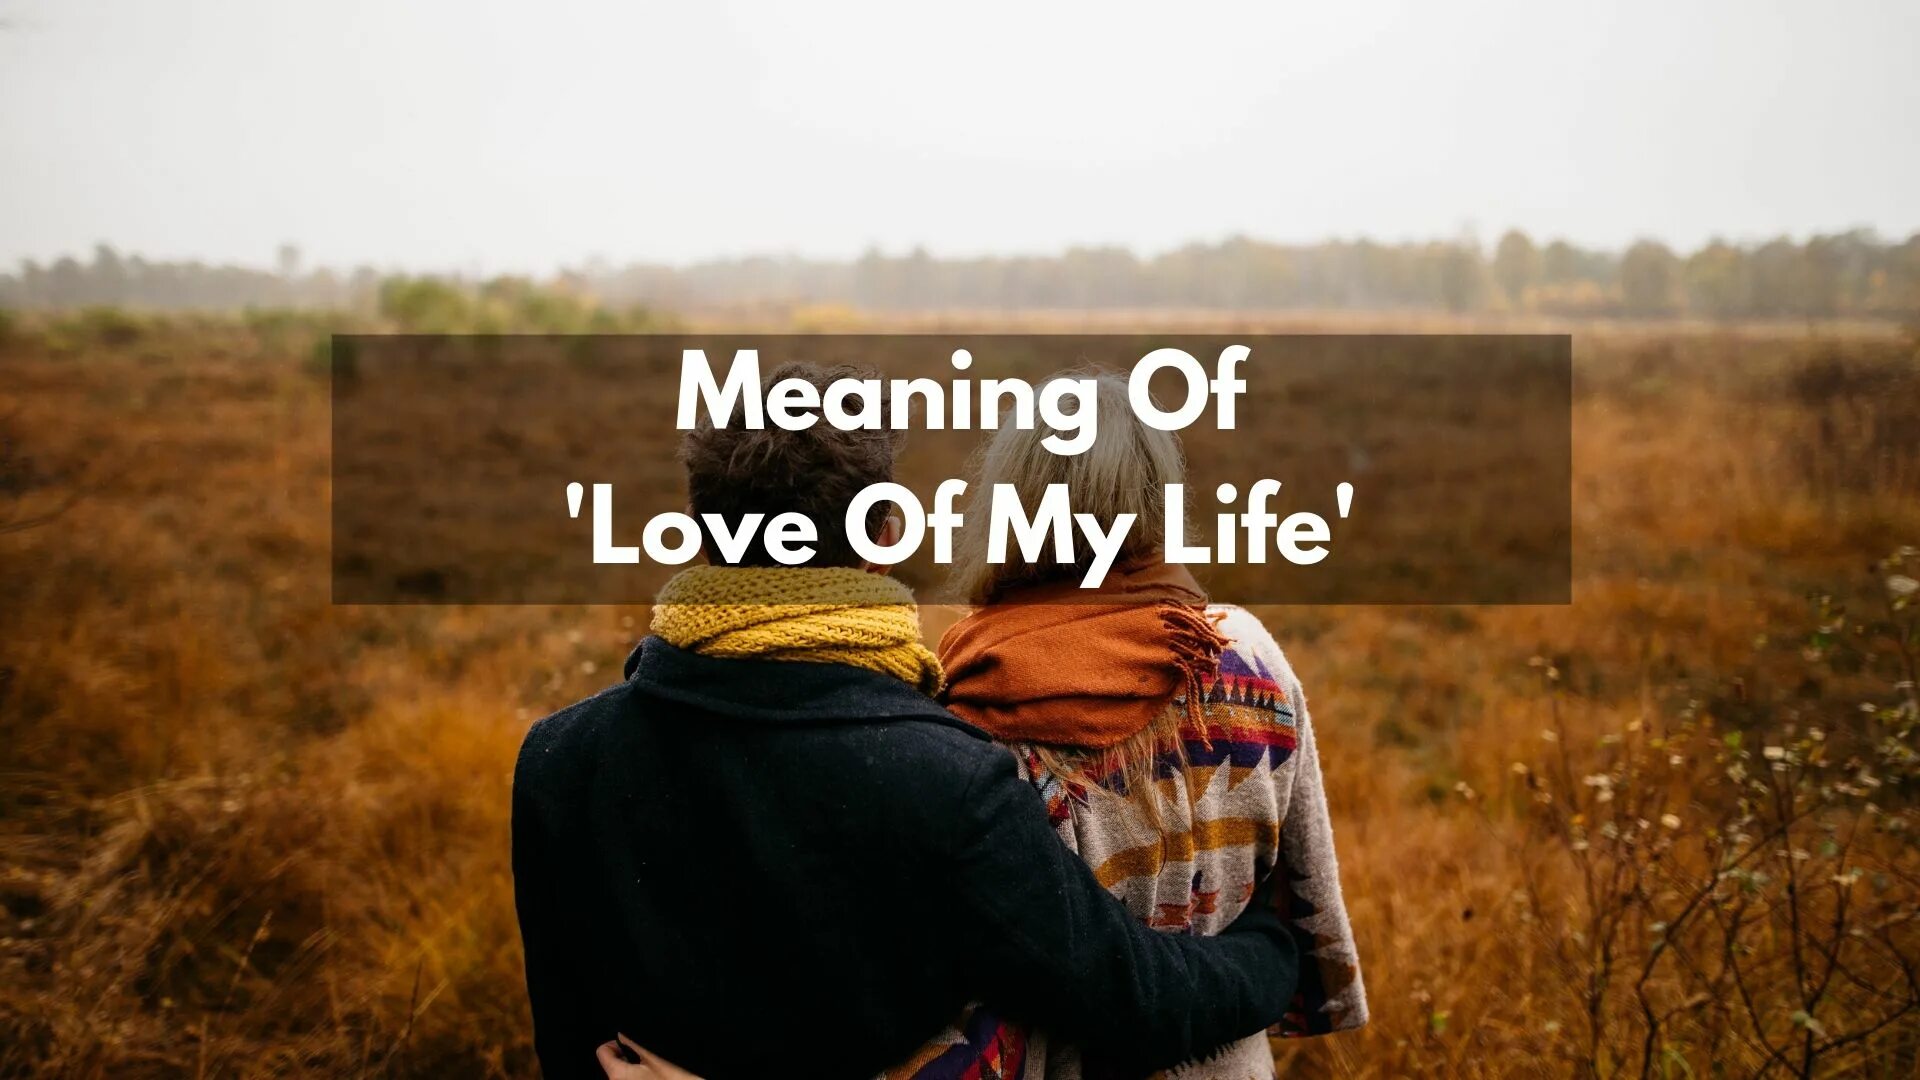 Them of life meaning of. What is the meaning of Life. Love connection. Meaning in Life. Love means Life.